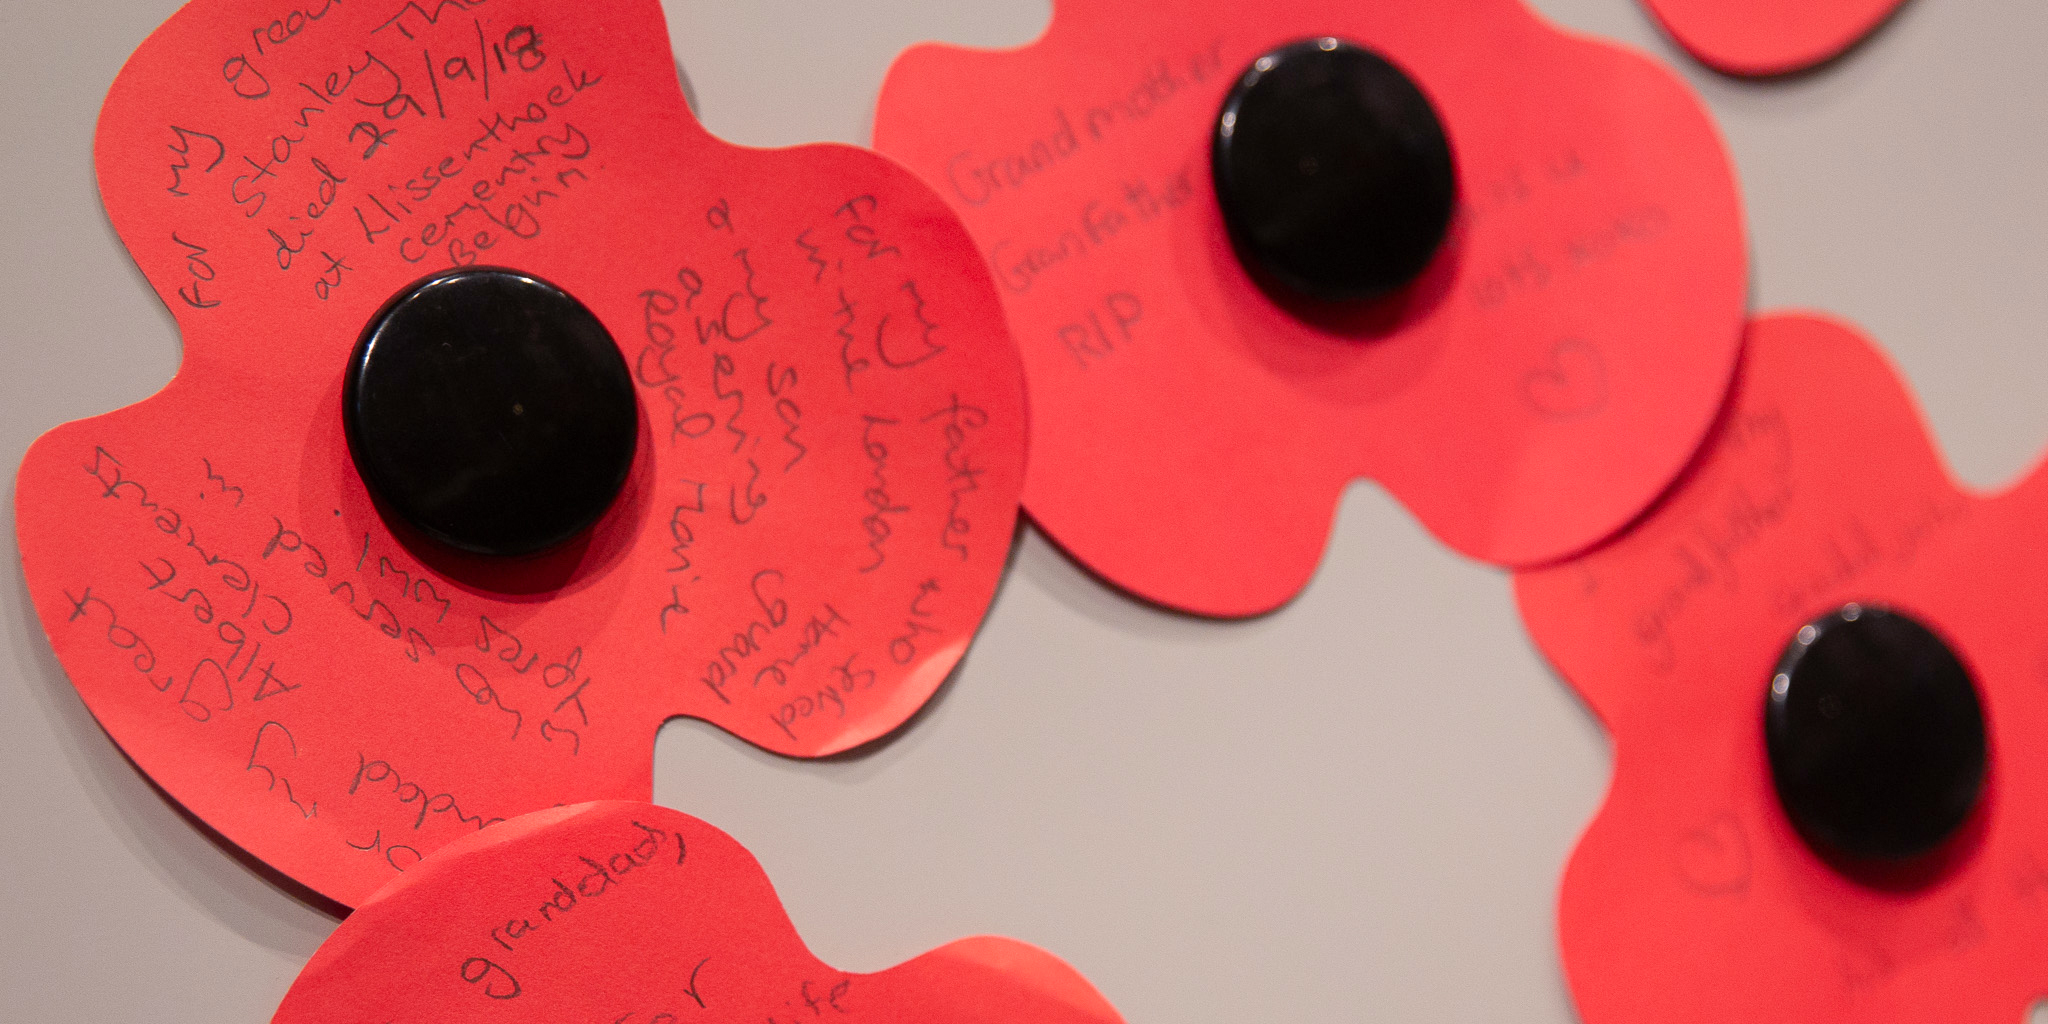 A close up of several poppy interactive showing hand written visitor messages